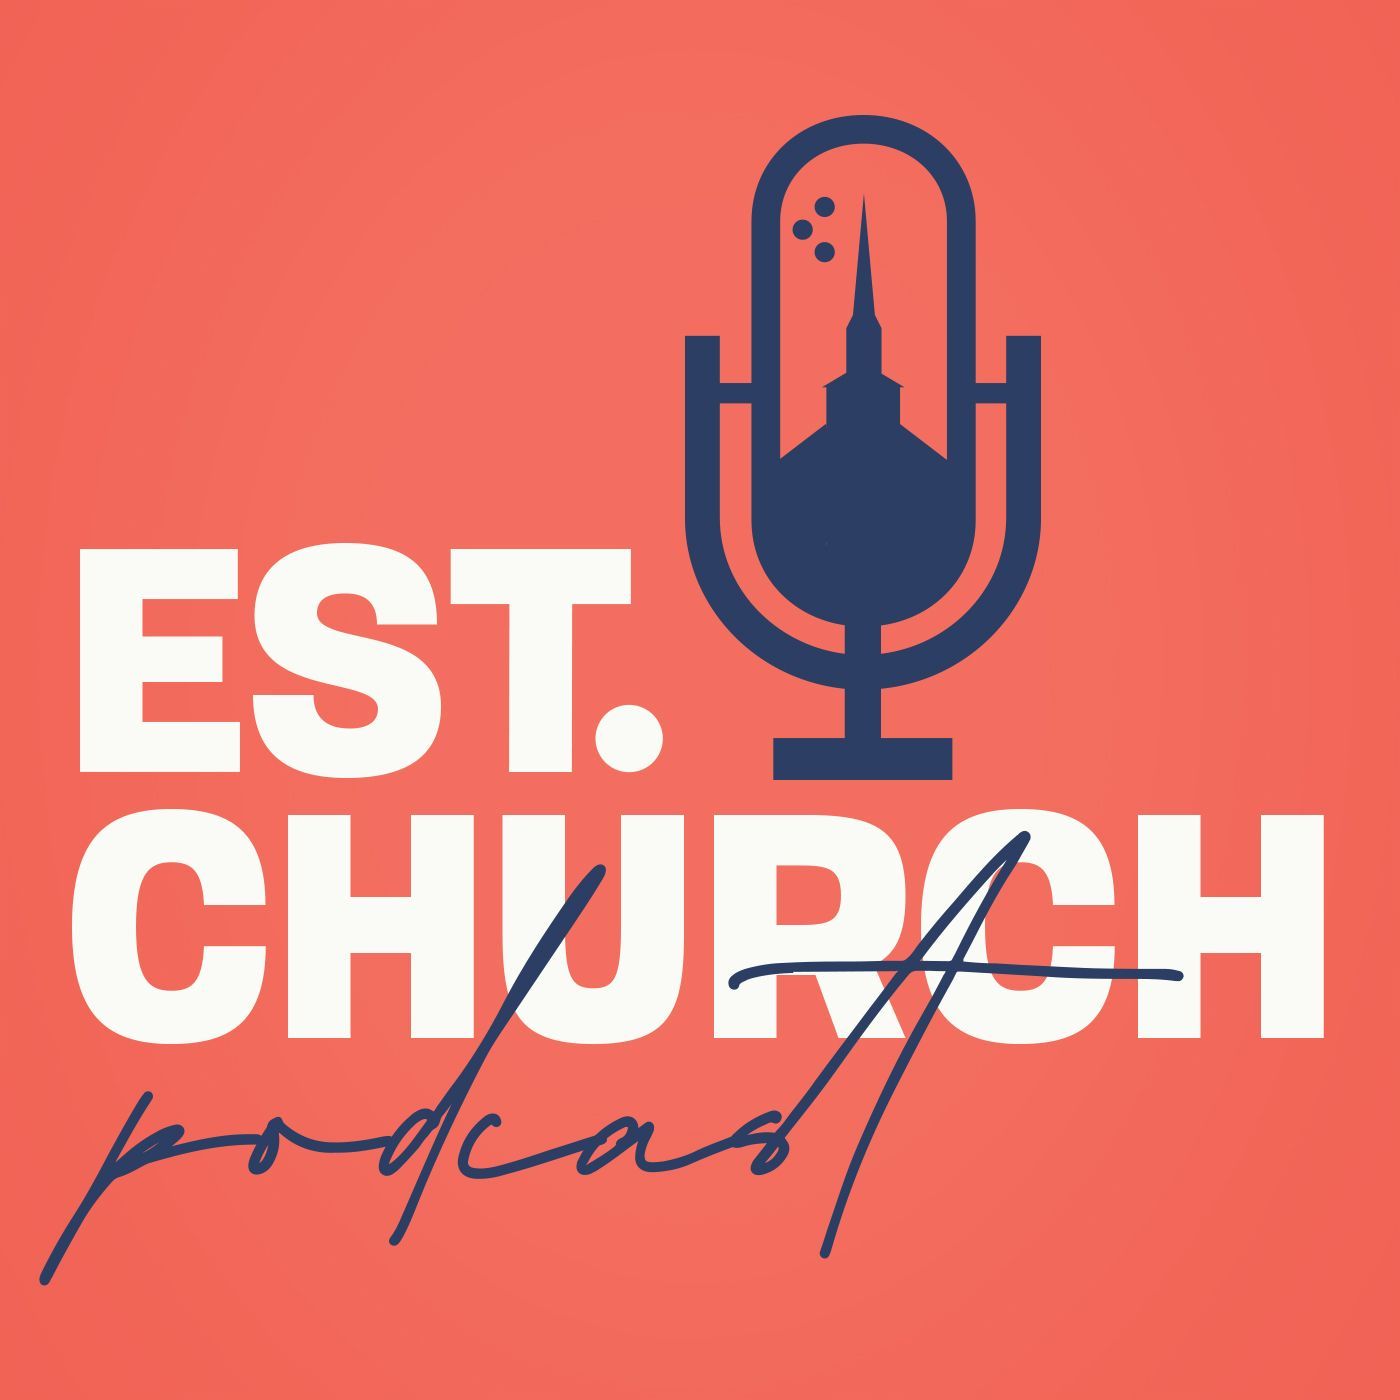 Does Live Streaming Help or Hurt the Church? (Ep. 385)